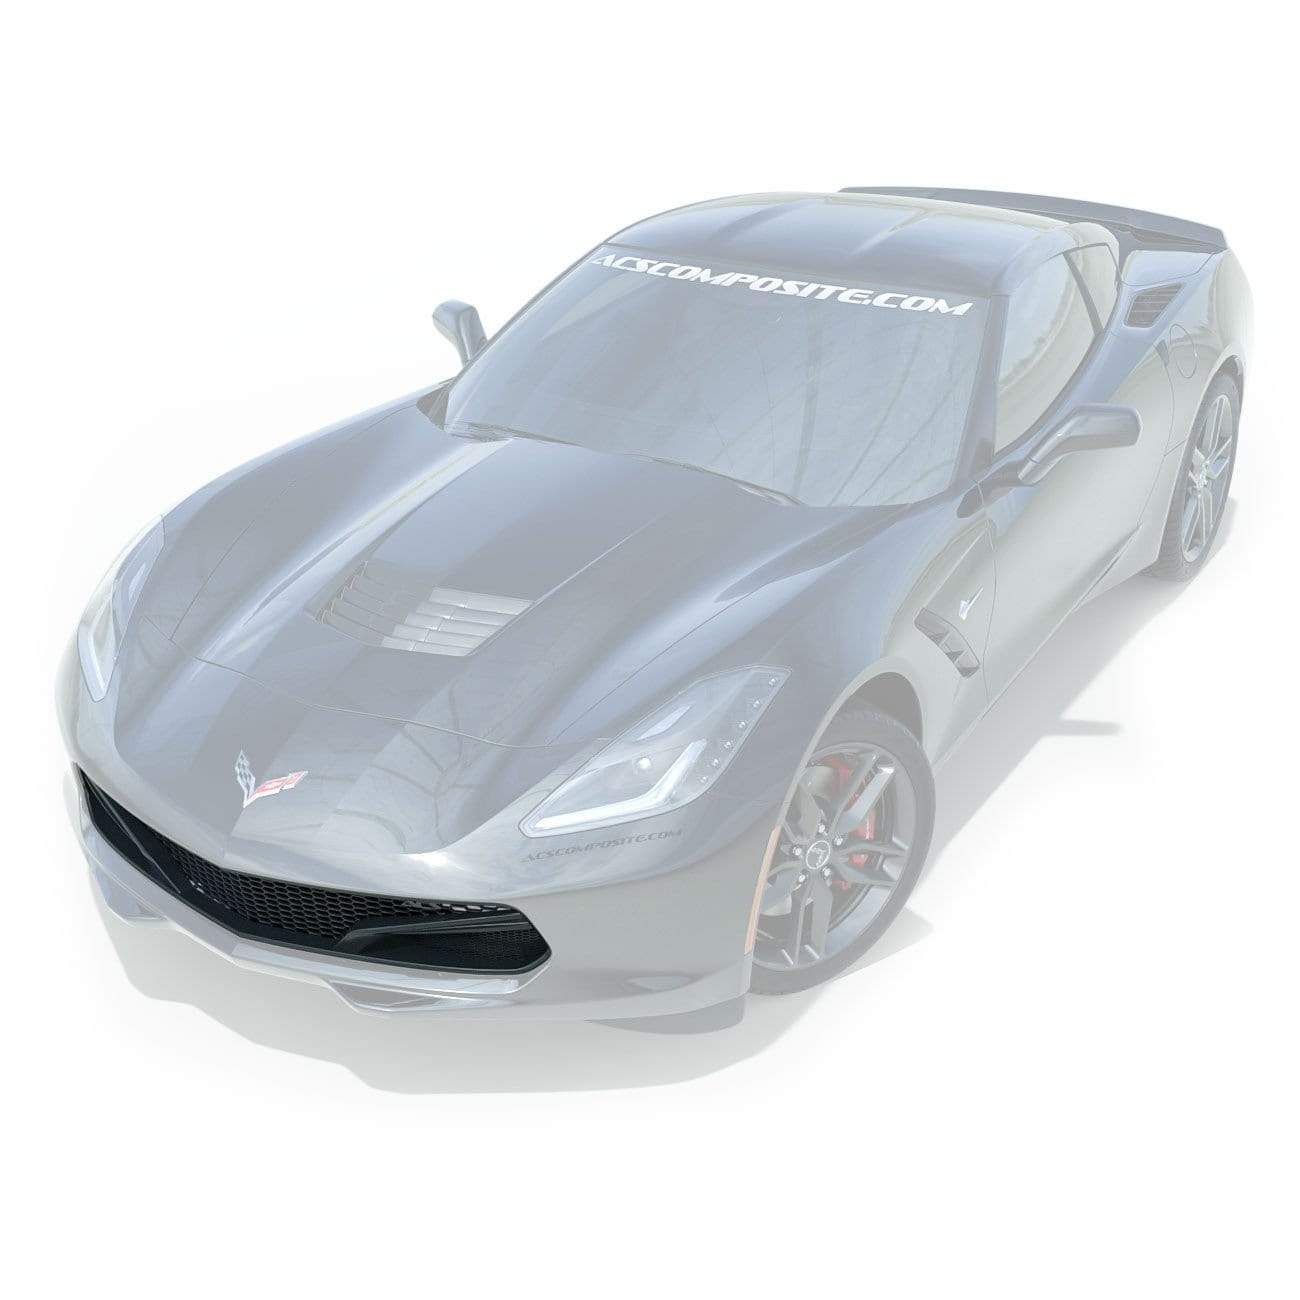 ACS Composite Five1 Front Bumper Grill for C7 Corvette [45-4-017]CFZ[45-4-081]: Carbon Flash Black Painted Mesh Design with Improved Brake Cooling & Optional Camera Compatibility.